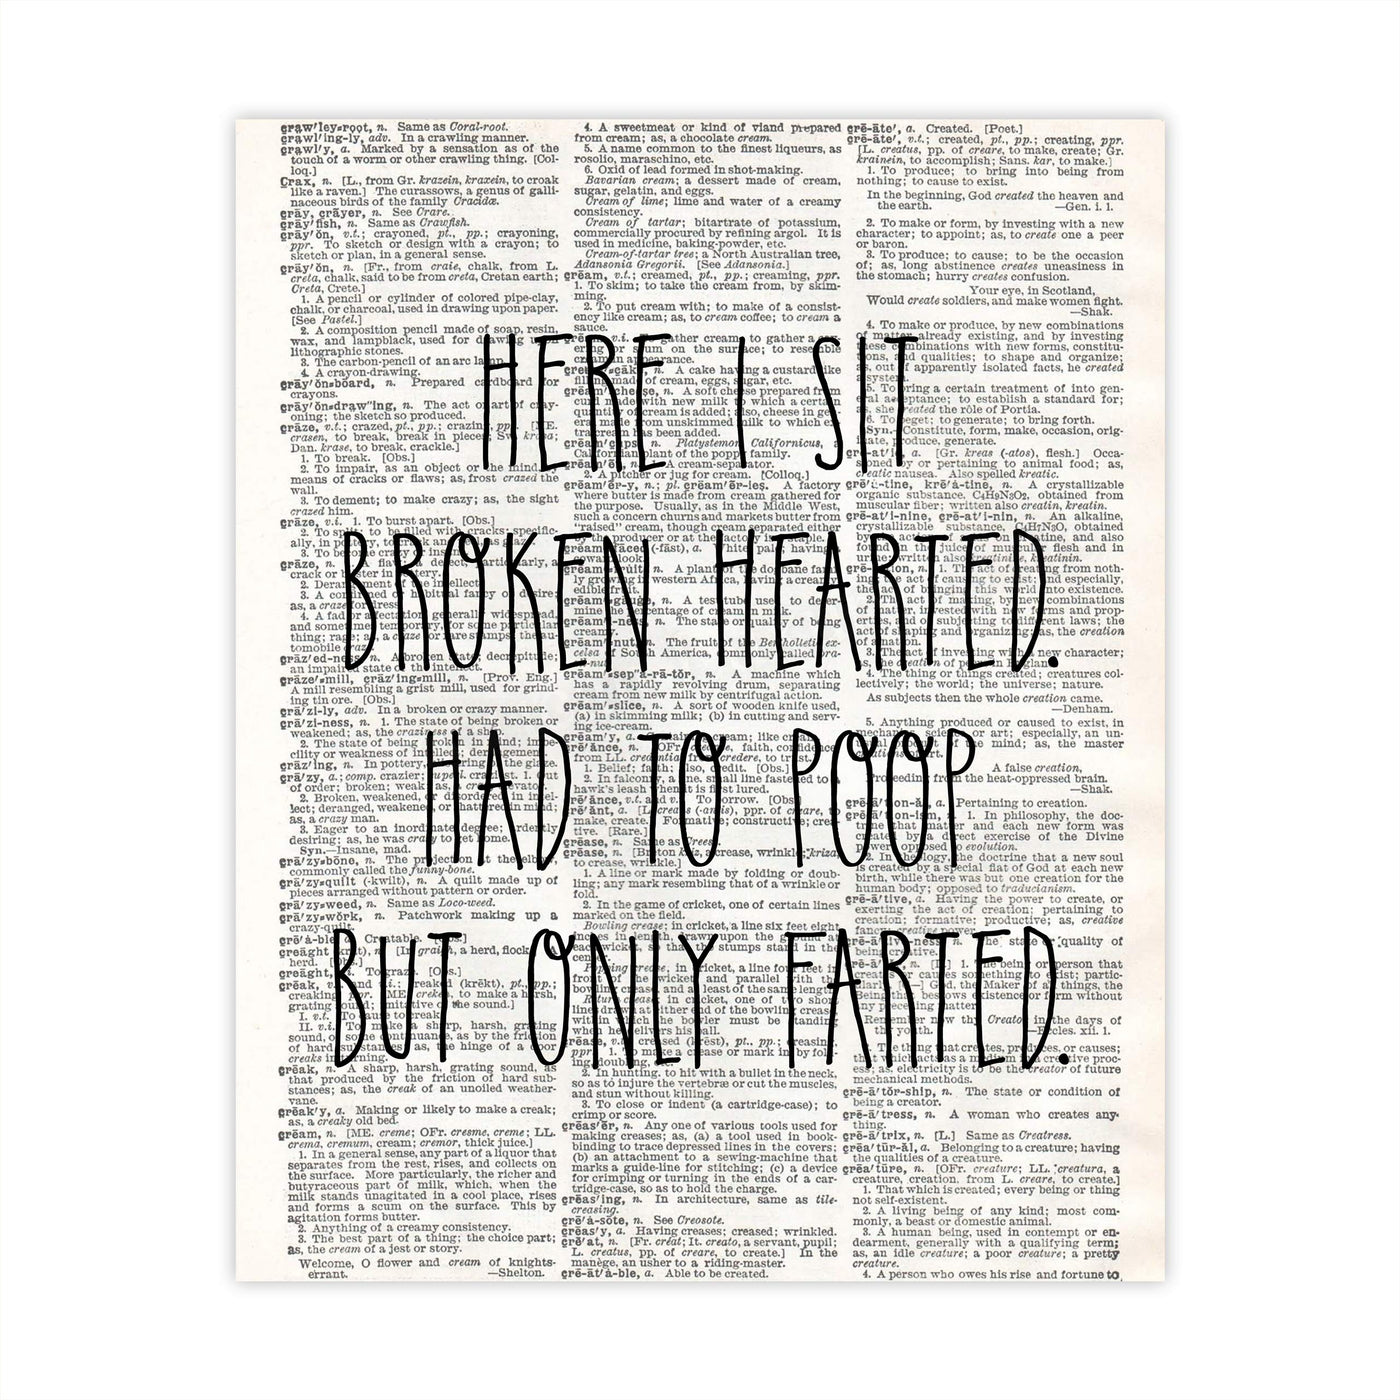 Funny Bathroom Wall Art-"Here I Sit Broken Hearted-Had to Poop-Only Farted"-8 x 10" Modern Newspaper Design Art Print-Ready to Frame. Humorous Decor for Home-Guest Bathroom. Great Housewarming Gift!